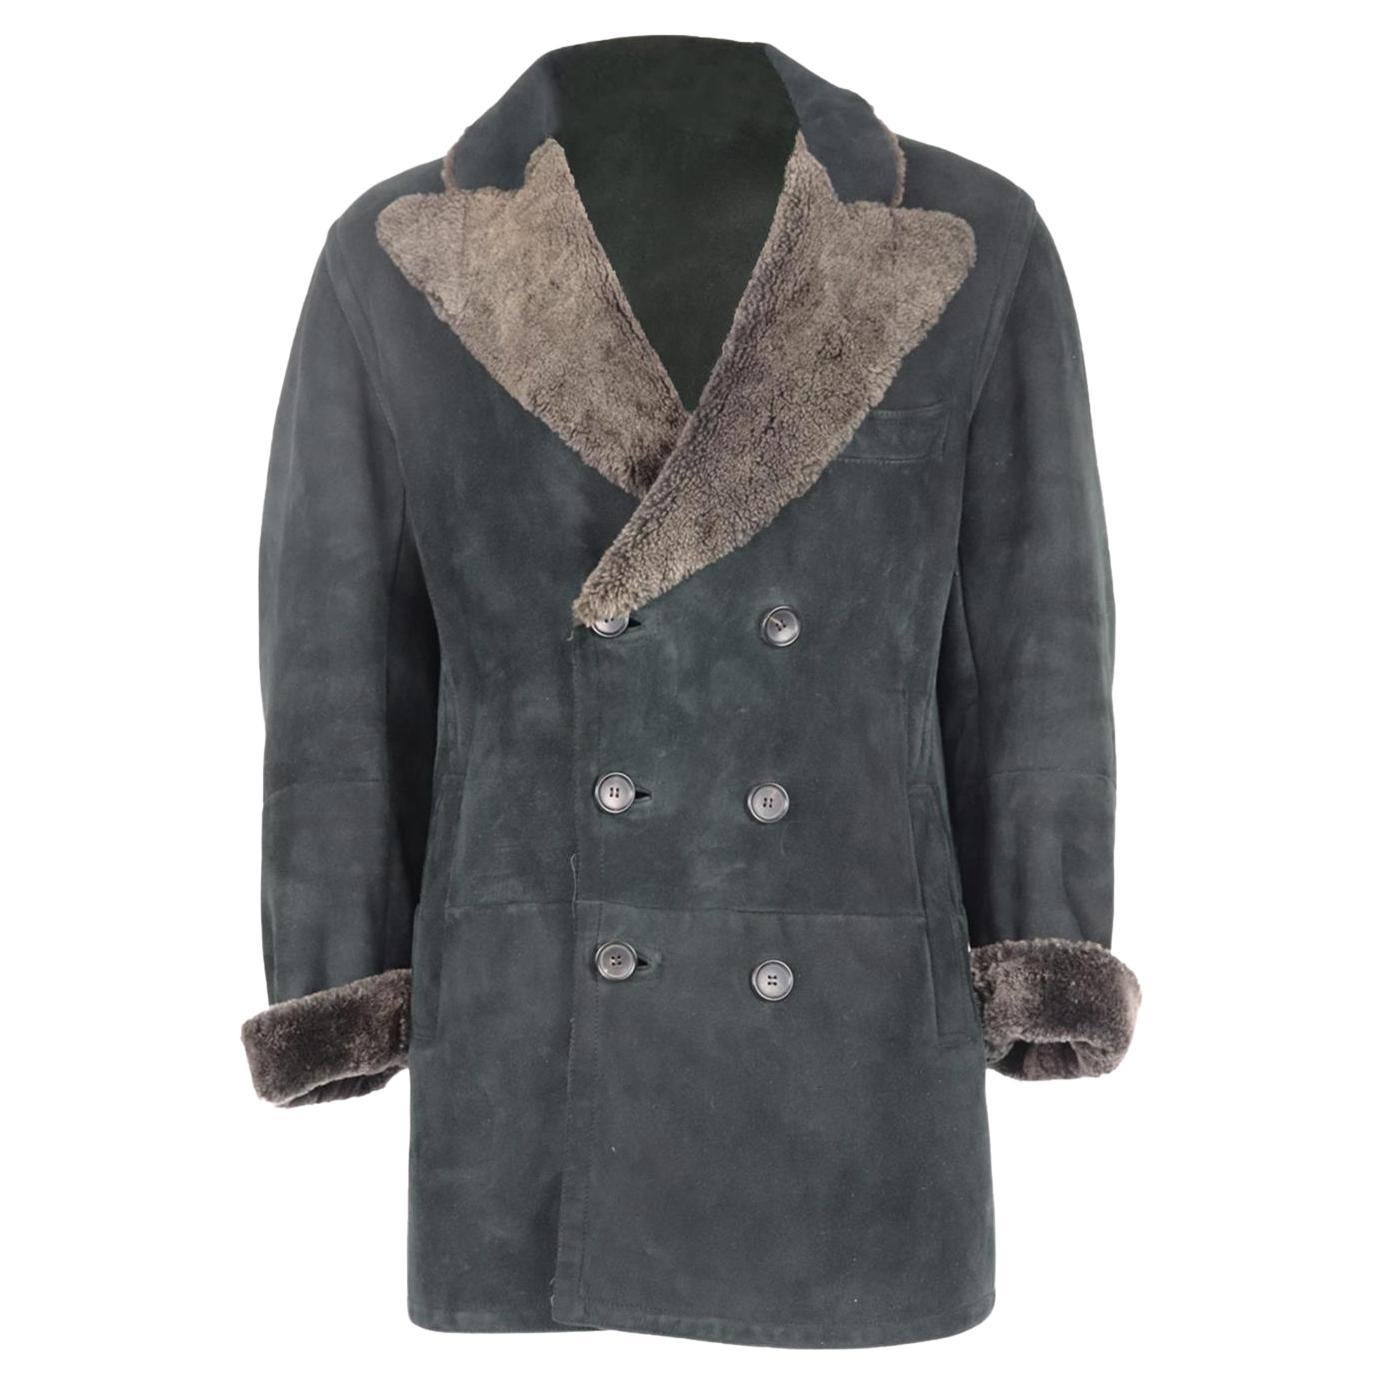 Gucci Men's Double Breasted Shearling Lined Suede Coat It 54 Uk/us Chest 44